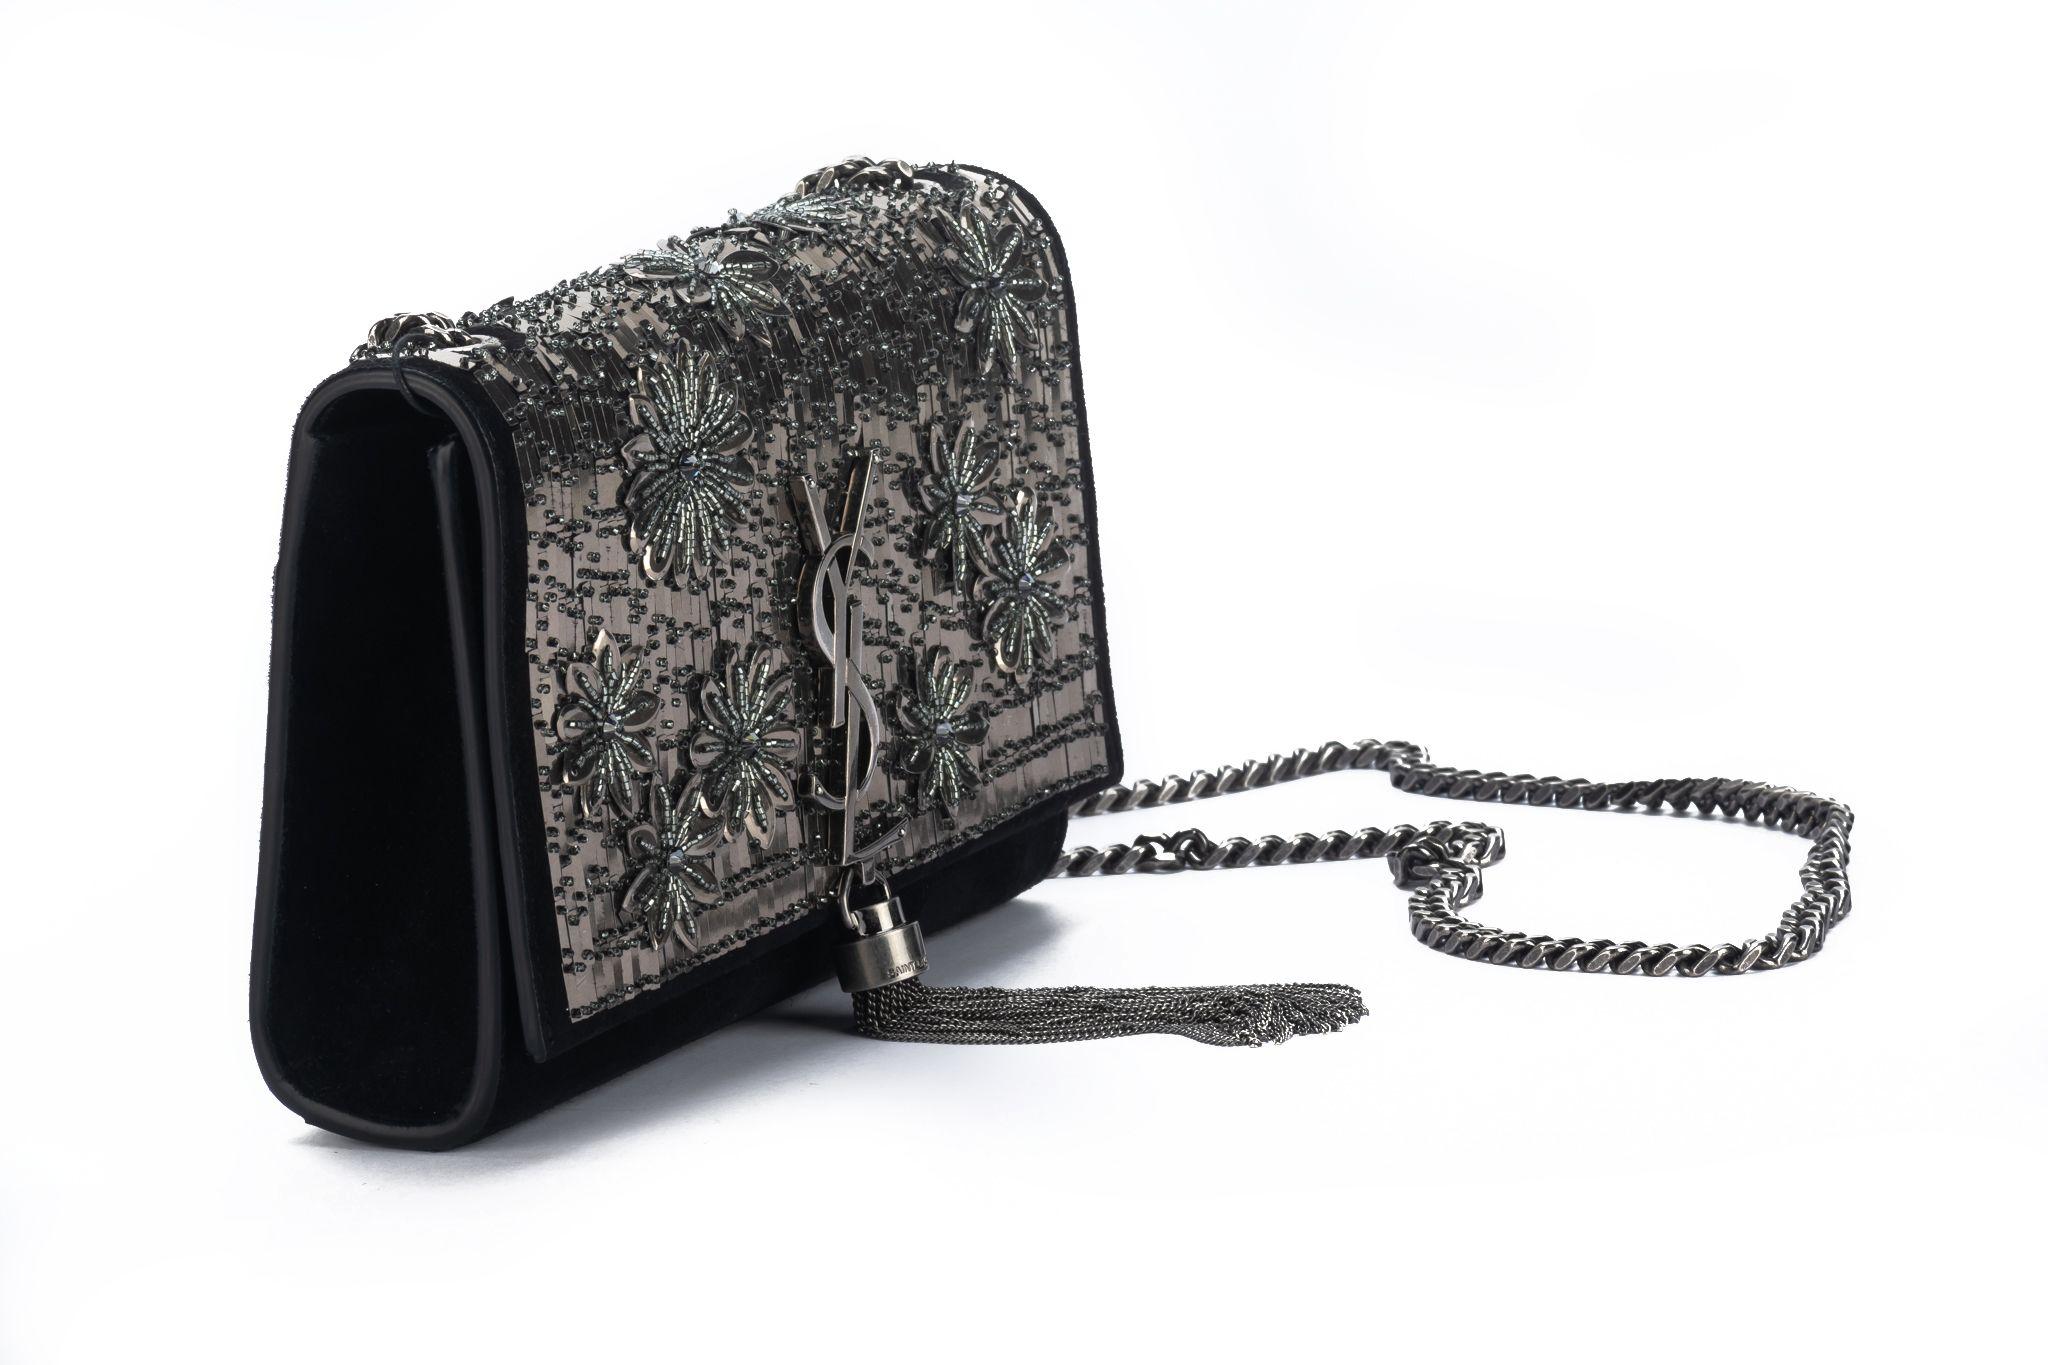 Yves Saint Laurent brand new beaded evening bag, black suede and gunmetal beading design. Can ne worn cross body or shoulder style .
Shoulder drop 22”. Comes with booklet and original dust cover .